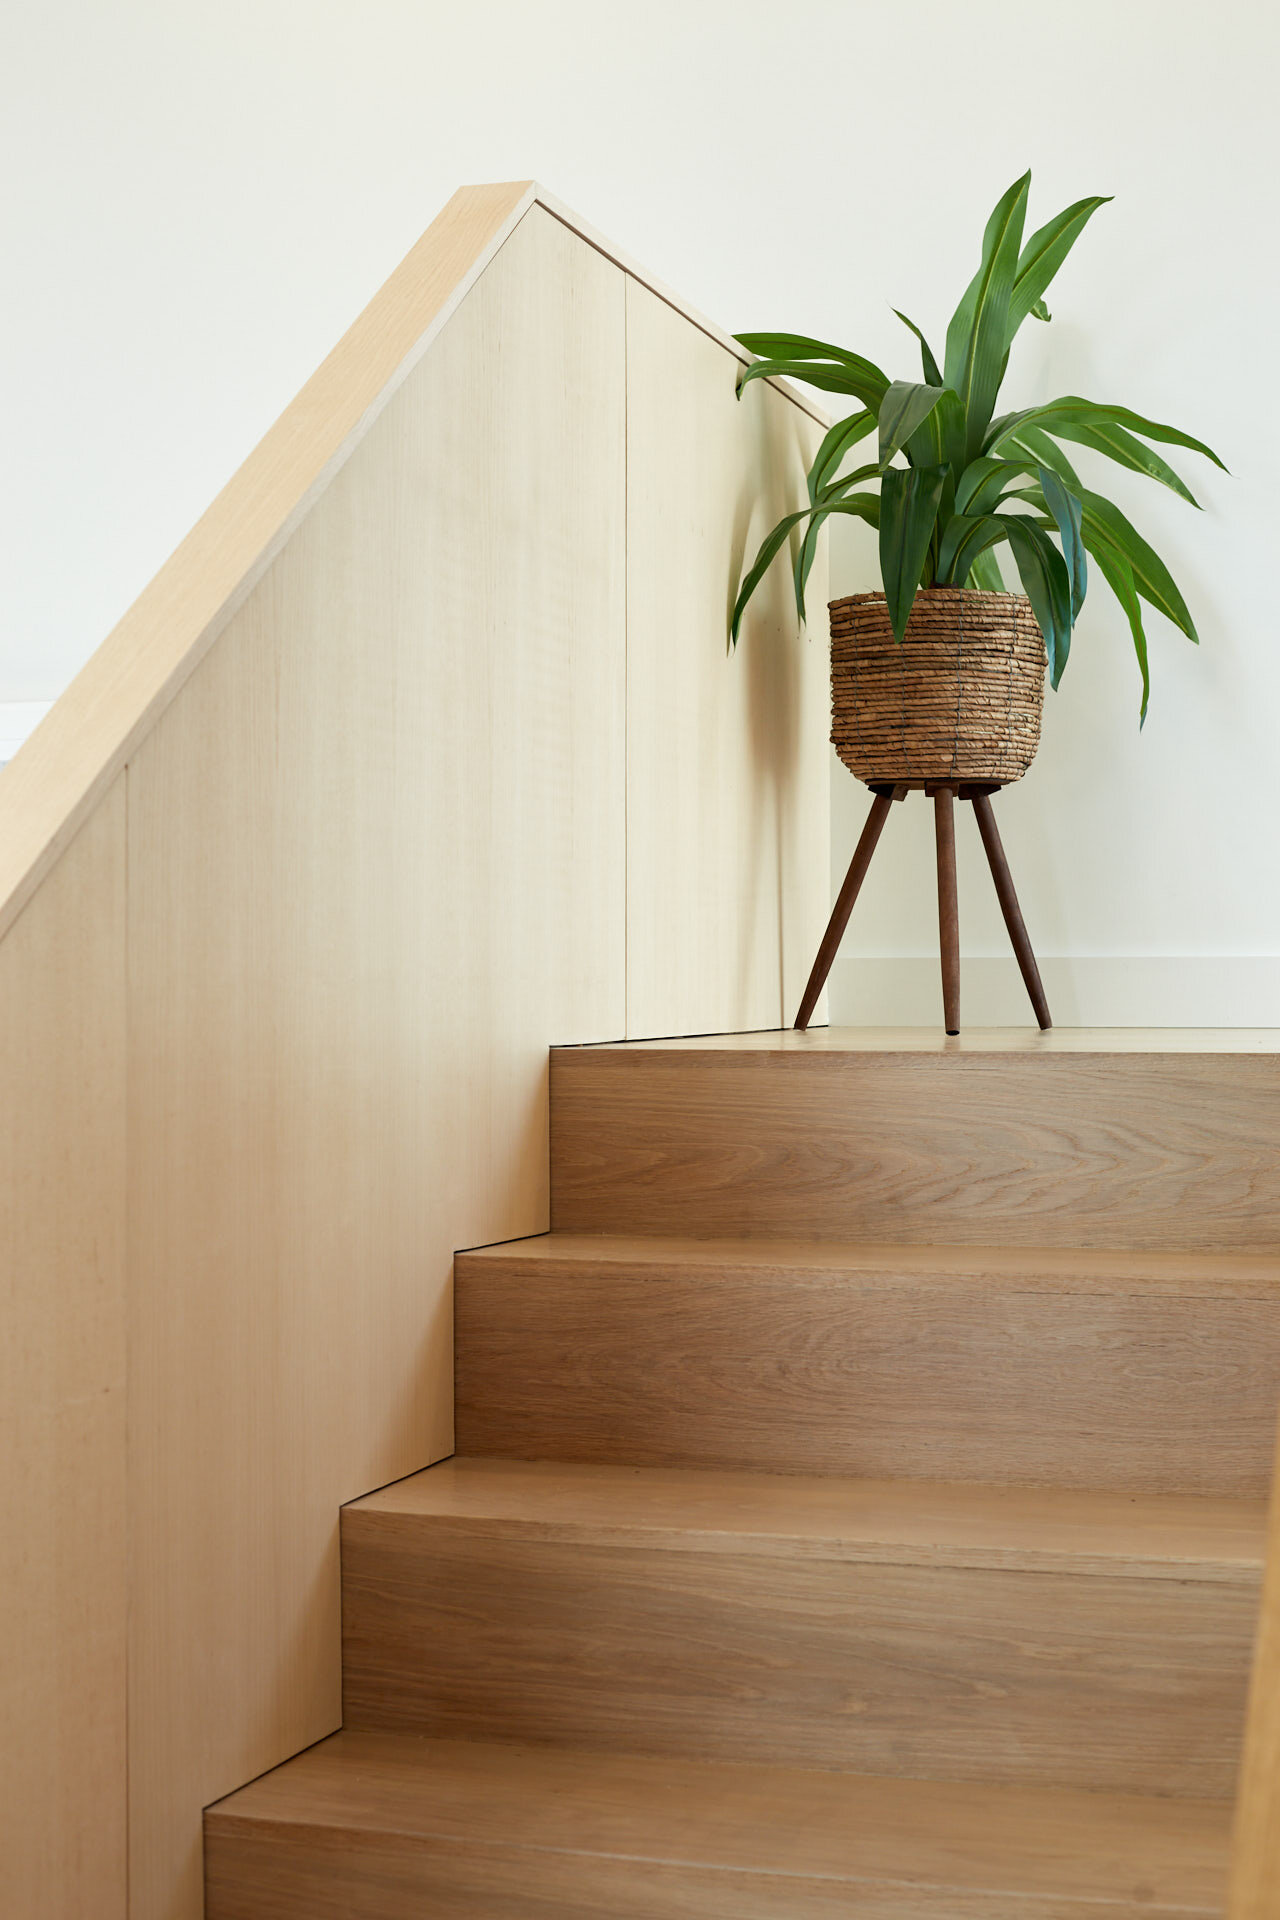  organic stair⠀⠀⠀⠀⠀⠀⠀⠀⠀ ⠀⠀⠀⠀⠀⠀⠀⠀⠀ this house features an abundance of natural woodgrain, a look we absolutely love. 